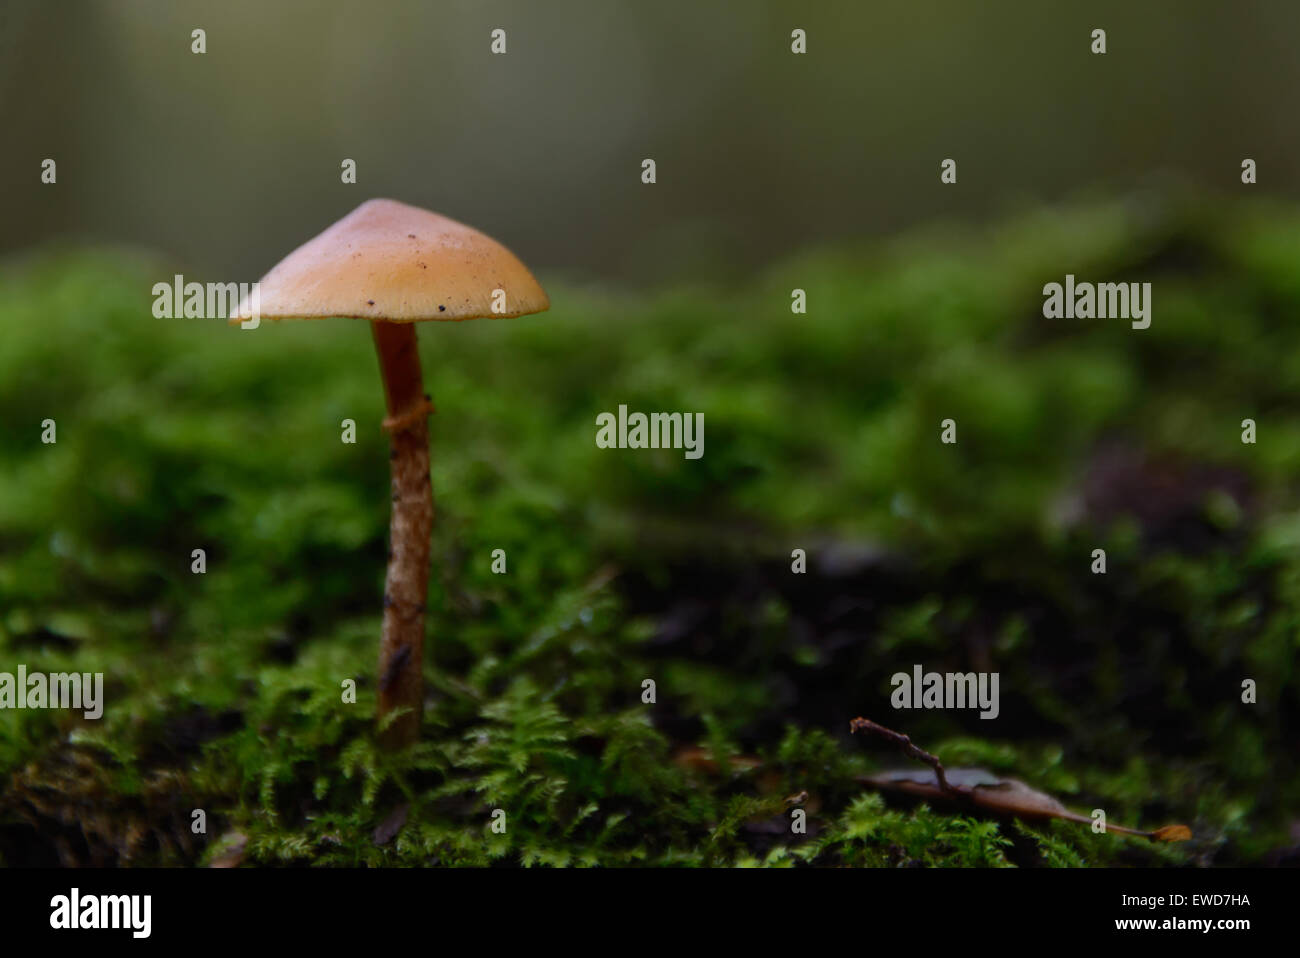 Autumn scene with a lonely mushroom and moss in a forest. Stock Photo